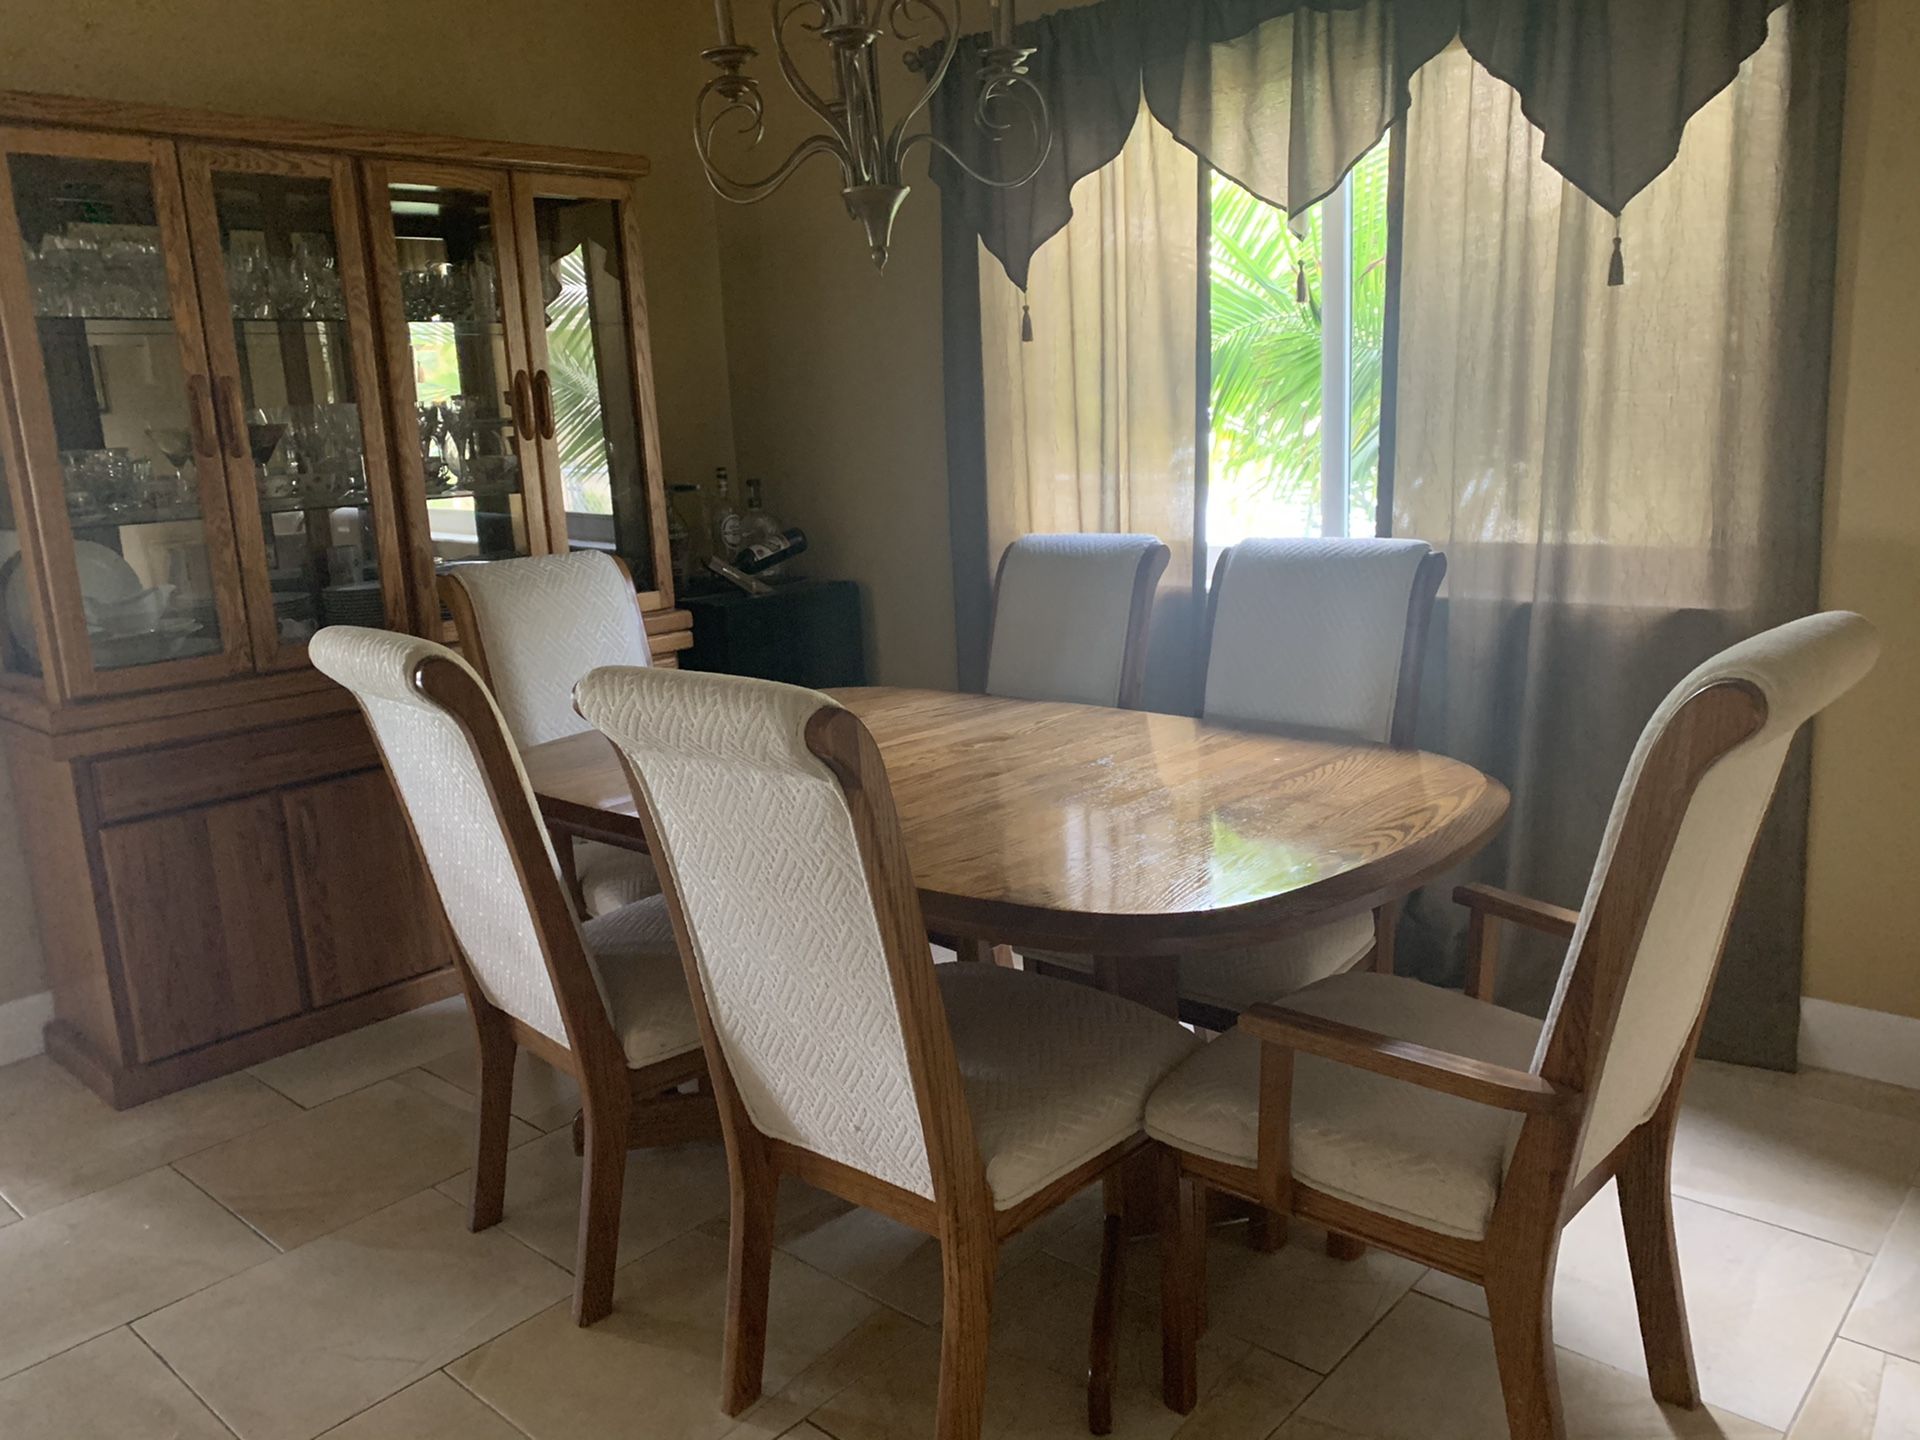 Dining room set with 6 chairs and hutch